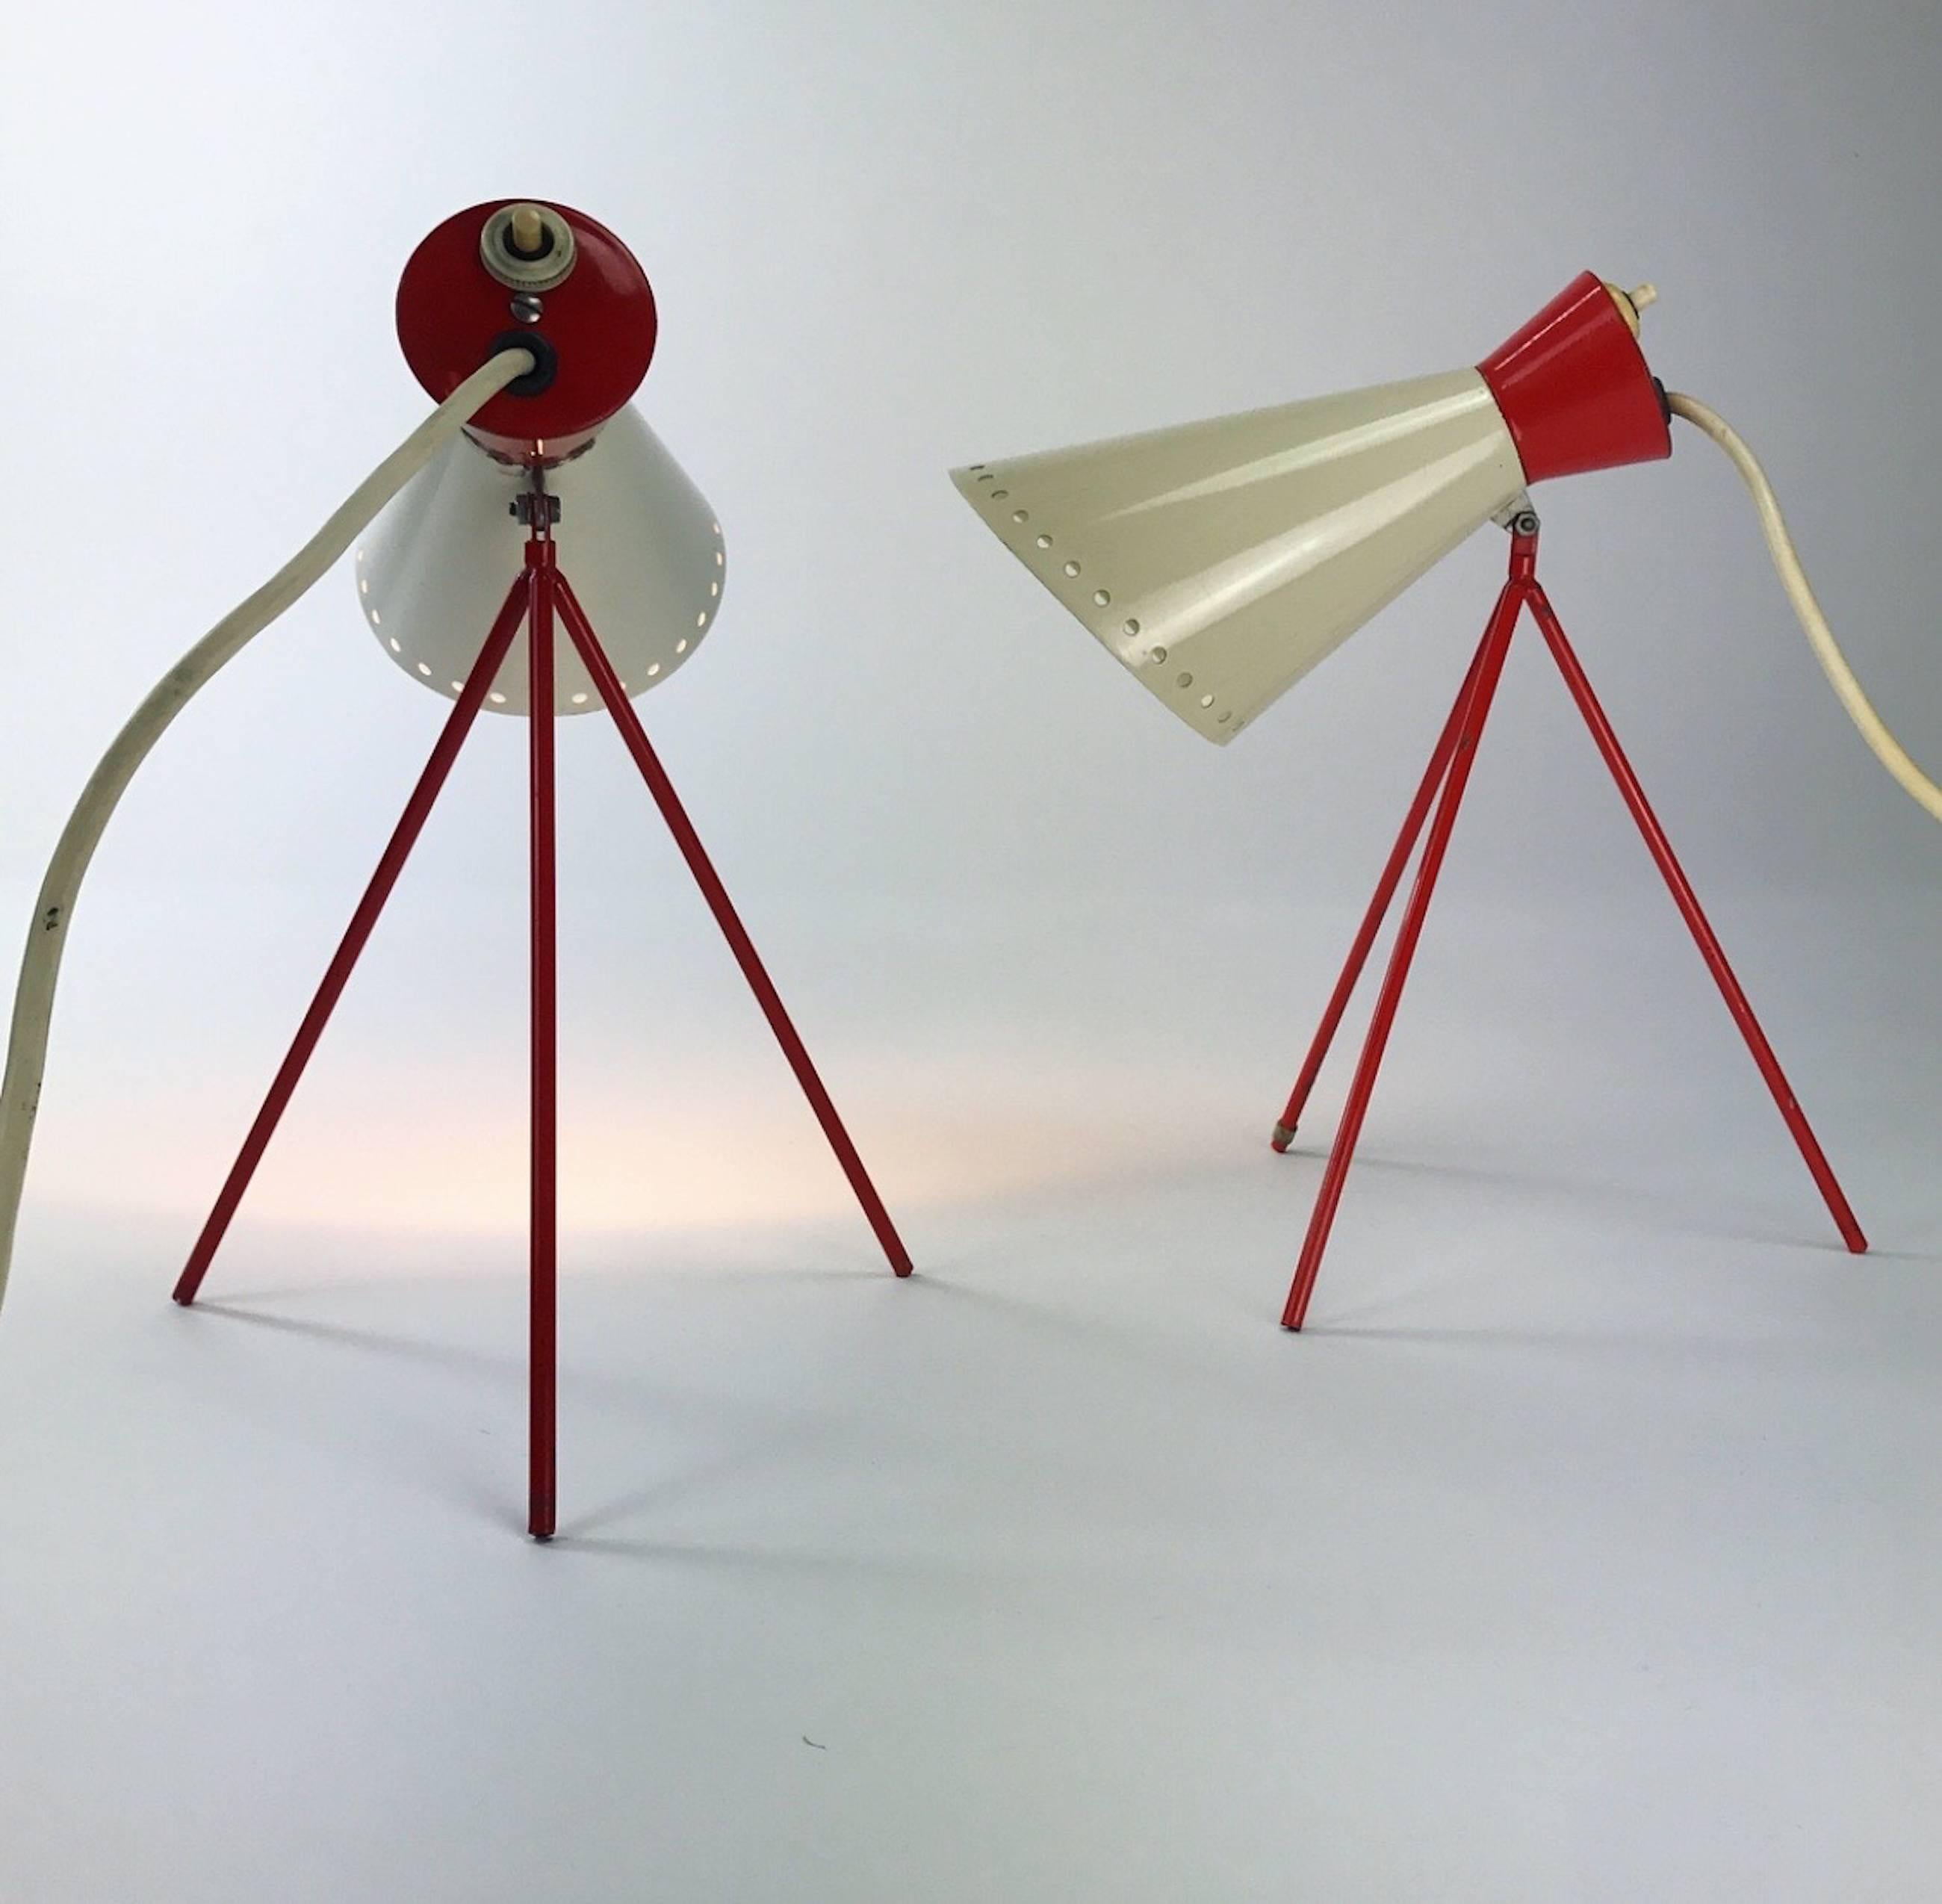 The iconic set of Josef Hurka table lamps manufactured by Napako, Czech, 1958.

First presented at the Expo 1958 in Bruxelles this beautiful diabollo shaped table lamp has become an icon for the atomic age era of the European fifties